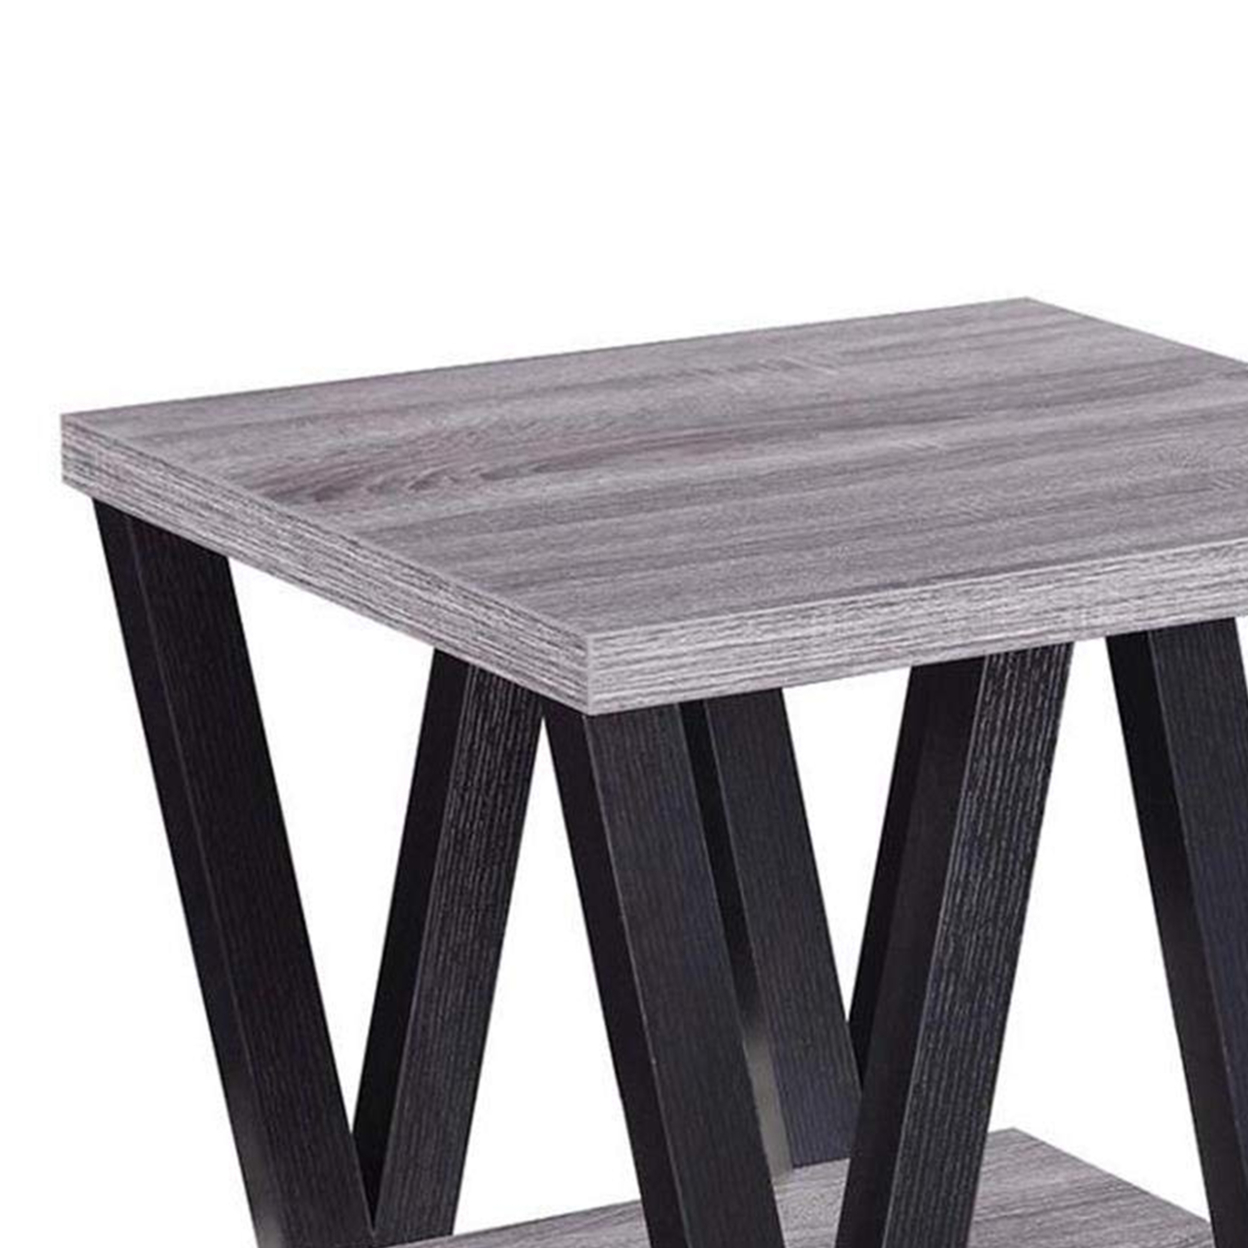 Zig Zag Contemporary Solid Wooden End Table With Bottom Shelf, Gray And Black- Saltoro Sherpi